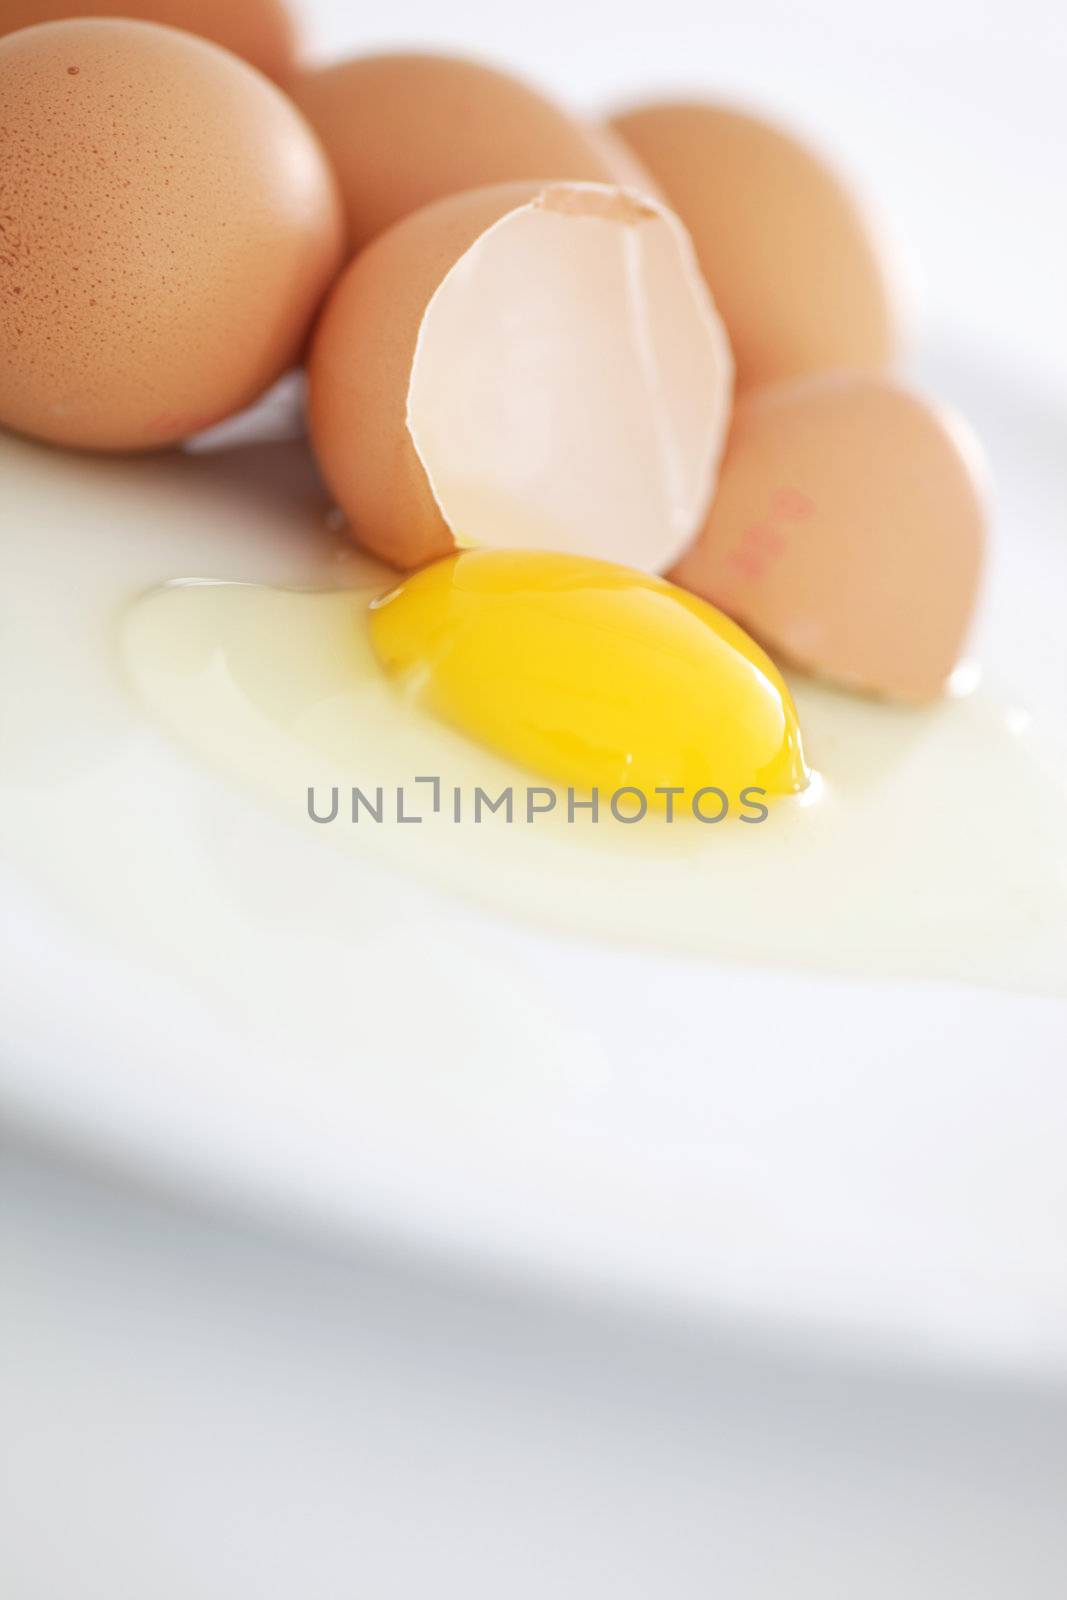 One broken egg in the foreground on a plate by Farina6000